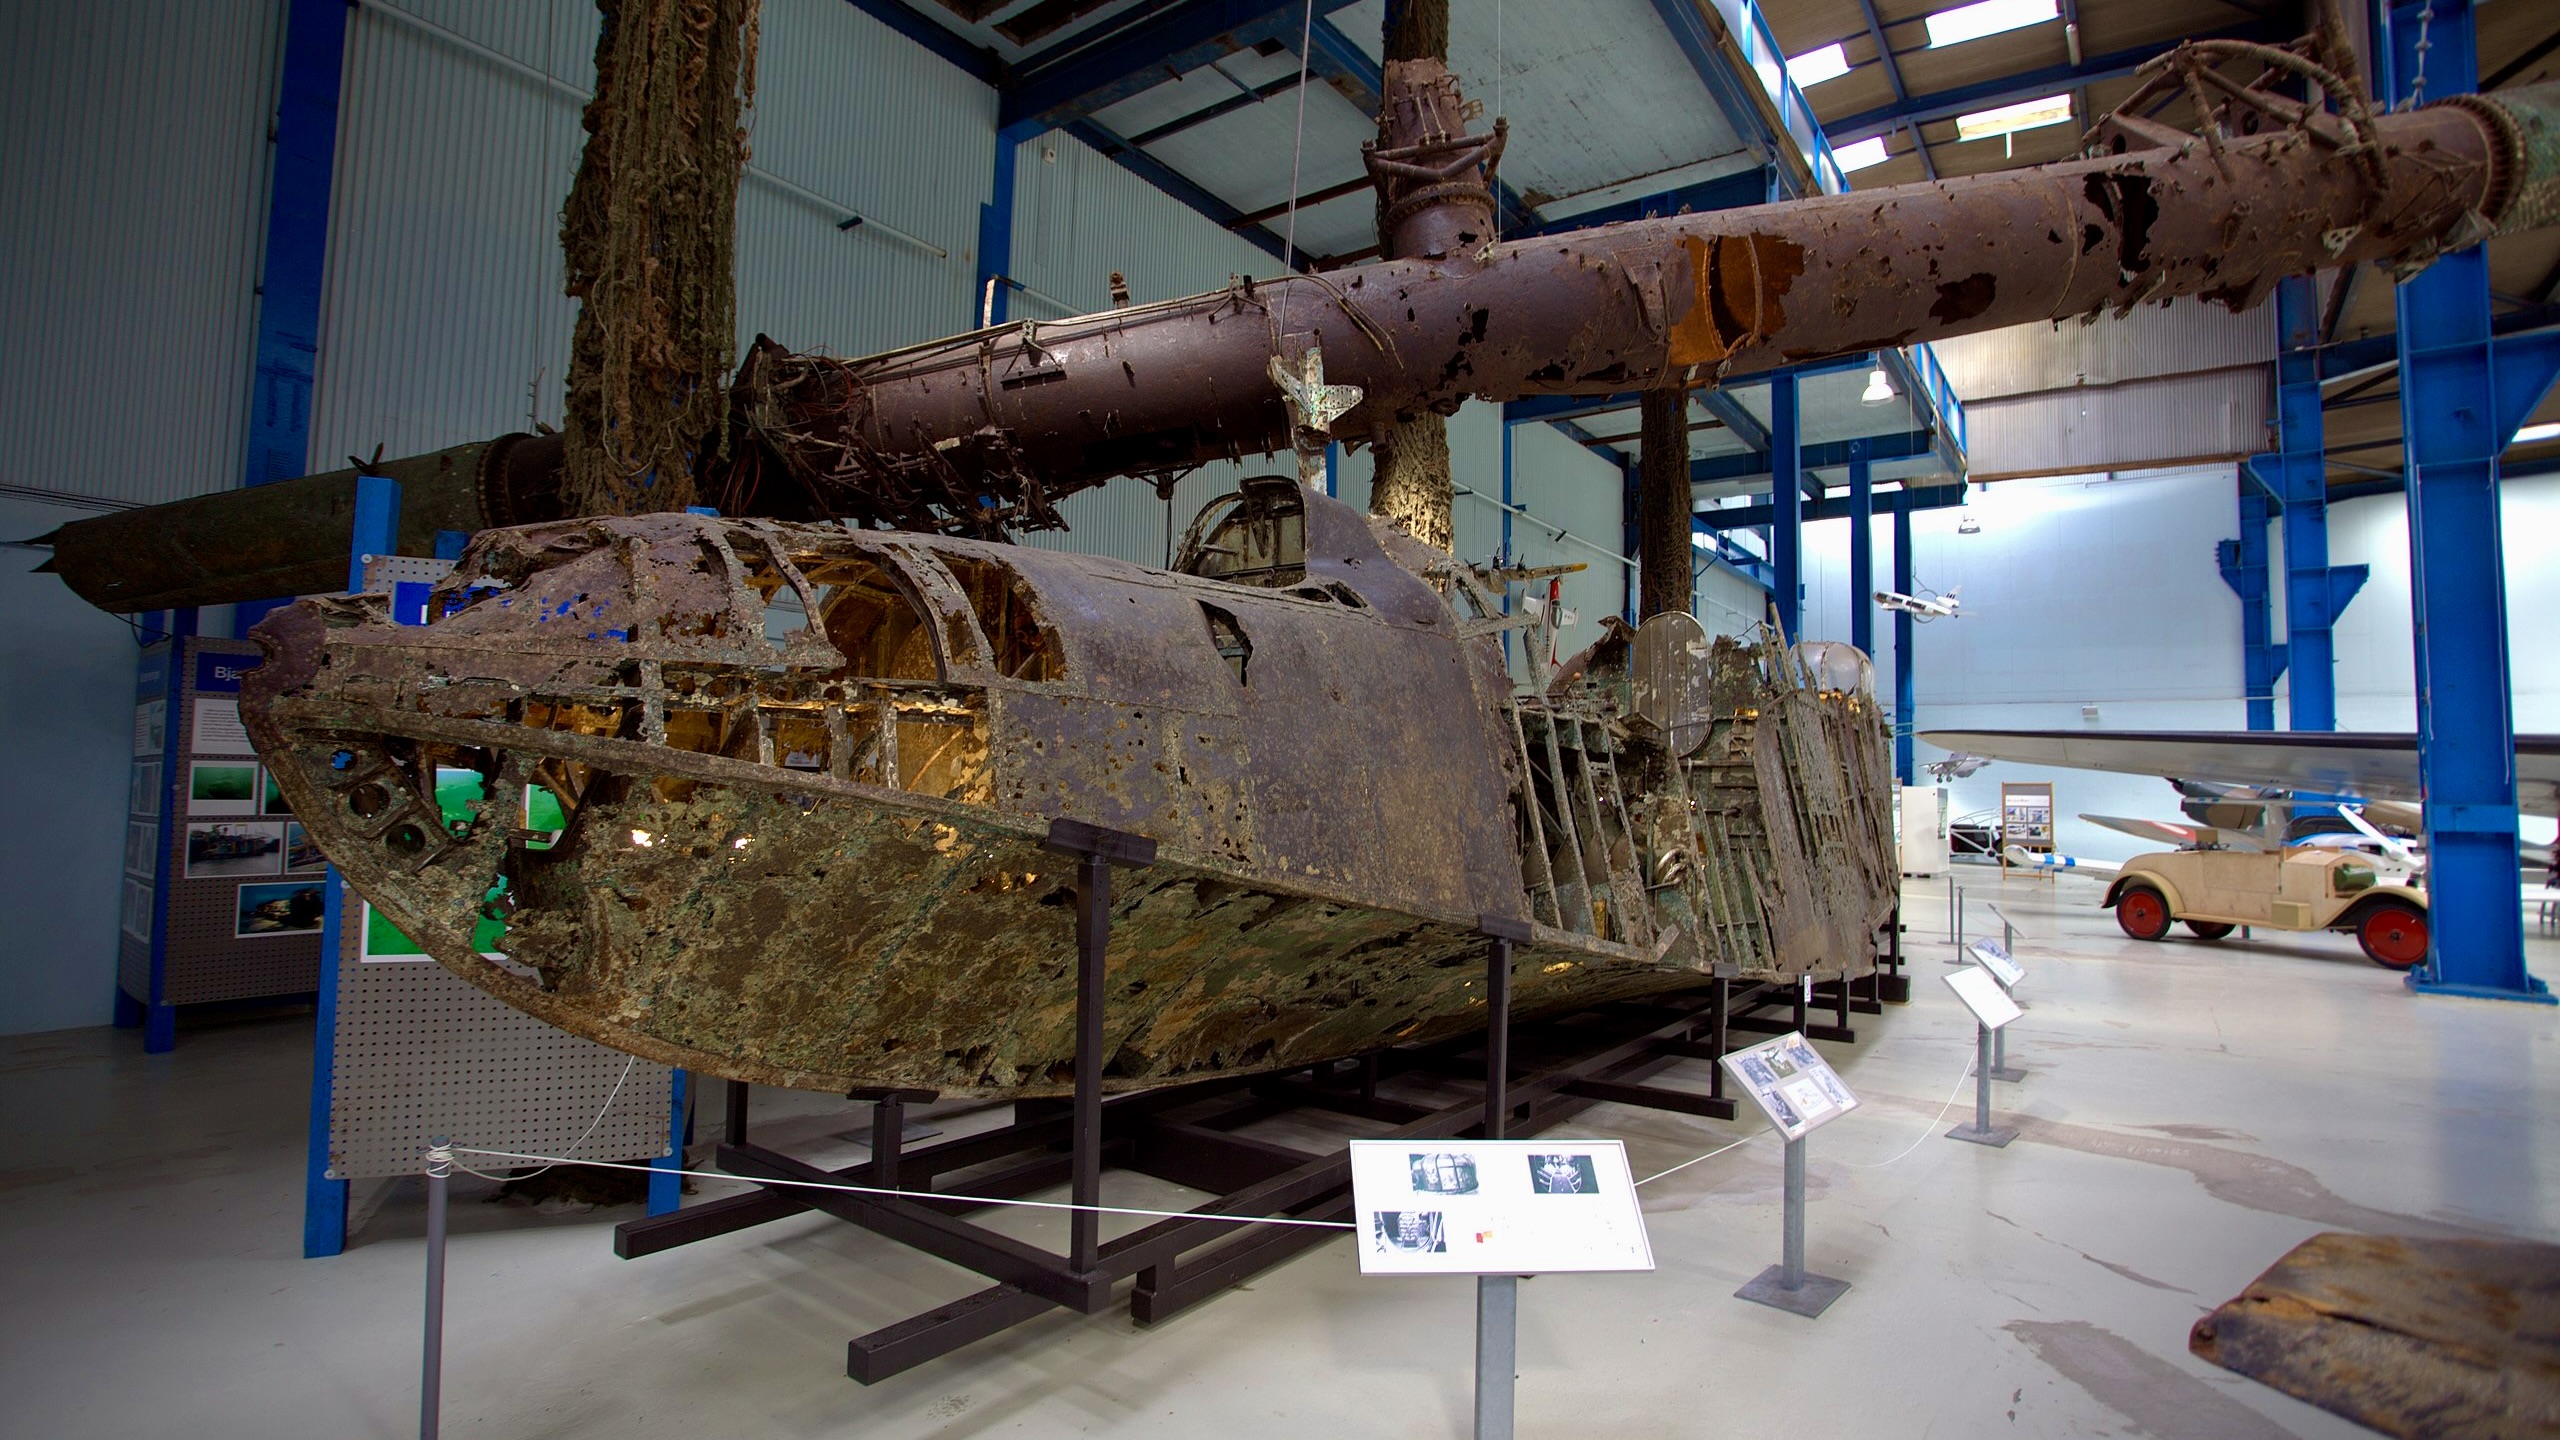 The wreck of a Blohm & Voss BV 138 at display at the National Museum of Science and Technology (Danmarks Tekniske Museum) in Elsinore, Denmark. The wing spar is poised over the aircraft in the same position as it was, when the wreck was discovered in The Sound, off of Copenhagen